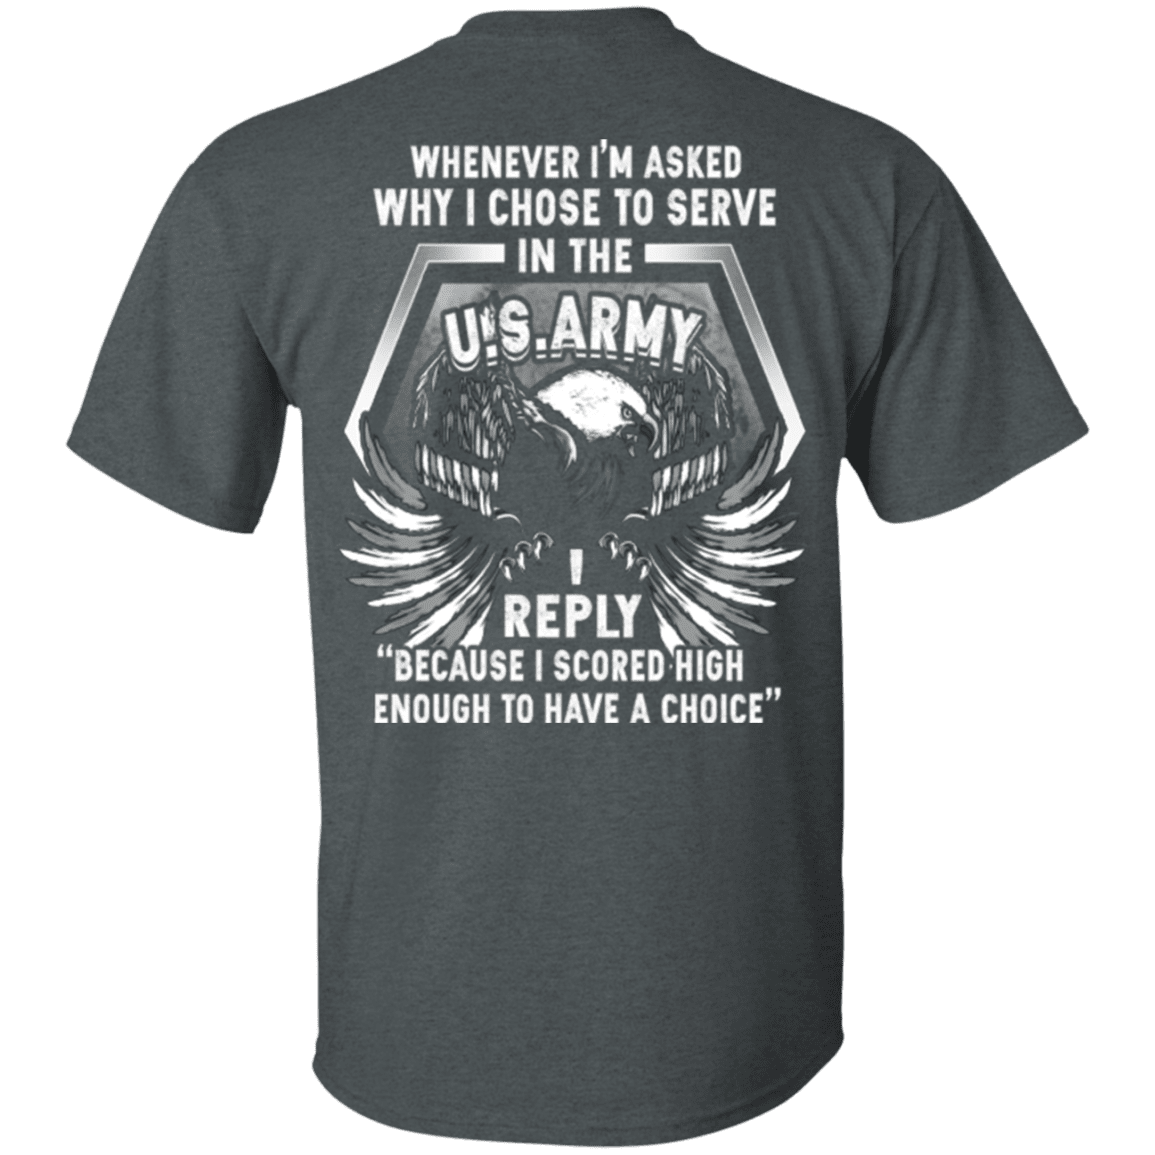 I Chose To Serve In The U.S Army T Shirt-TShirt-Army-Veterans Nation